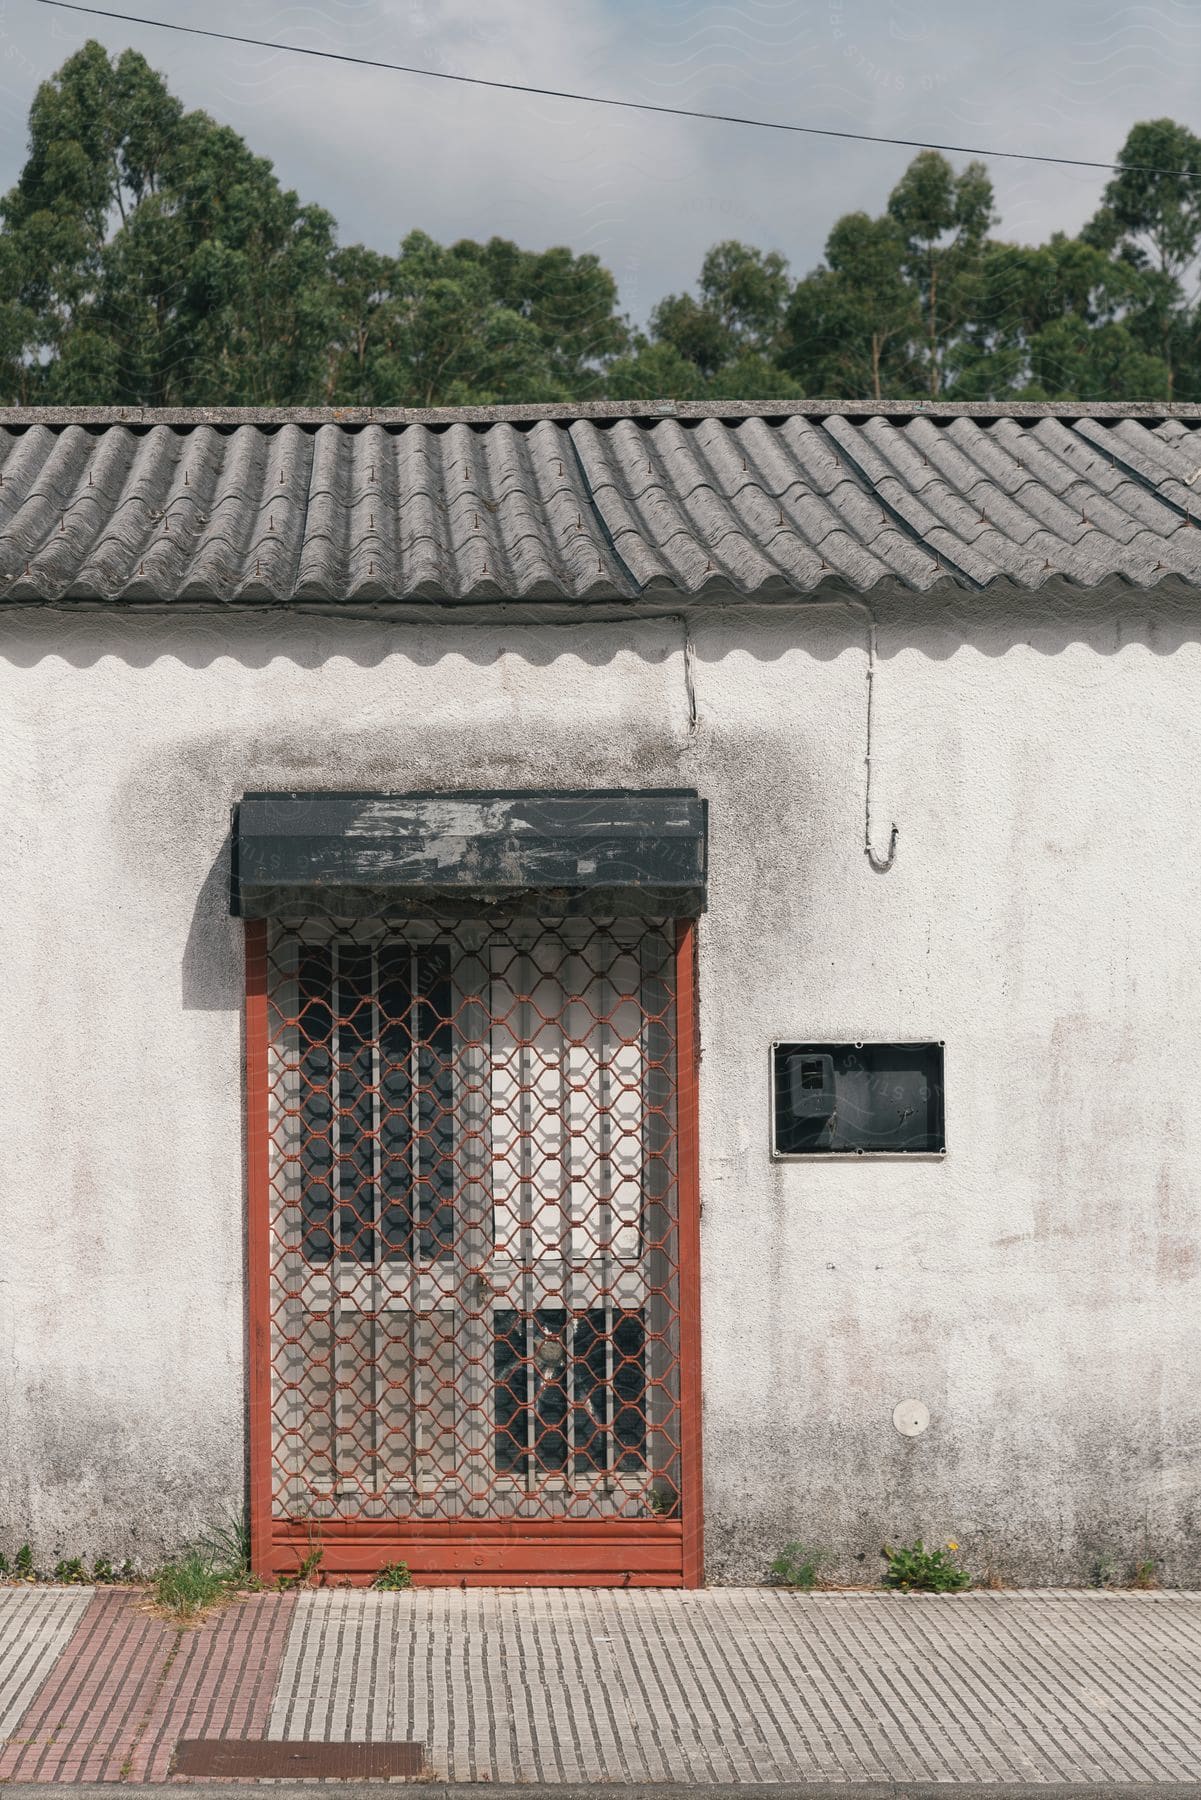 A worn-out house with a red door and a metal railing, under a cloudy sky. The building looks old, with a gray wall and traditional tiles on the roof.